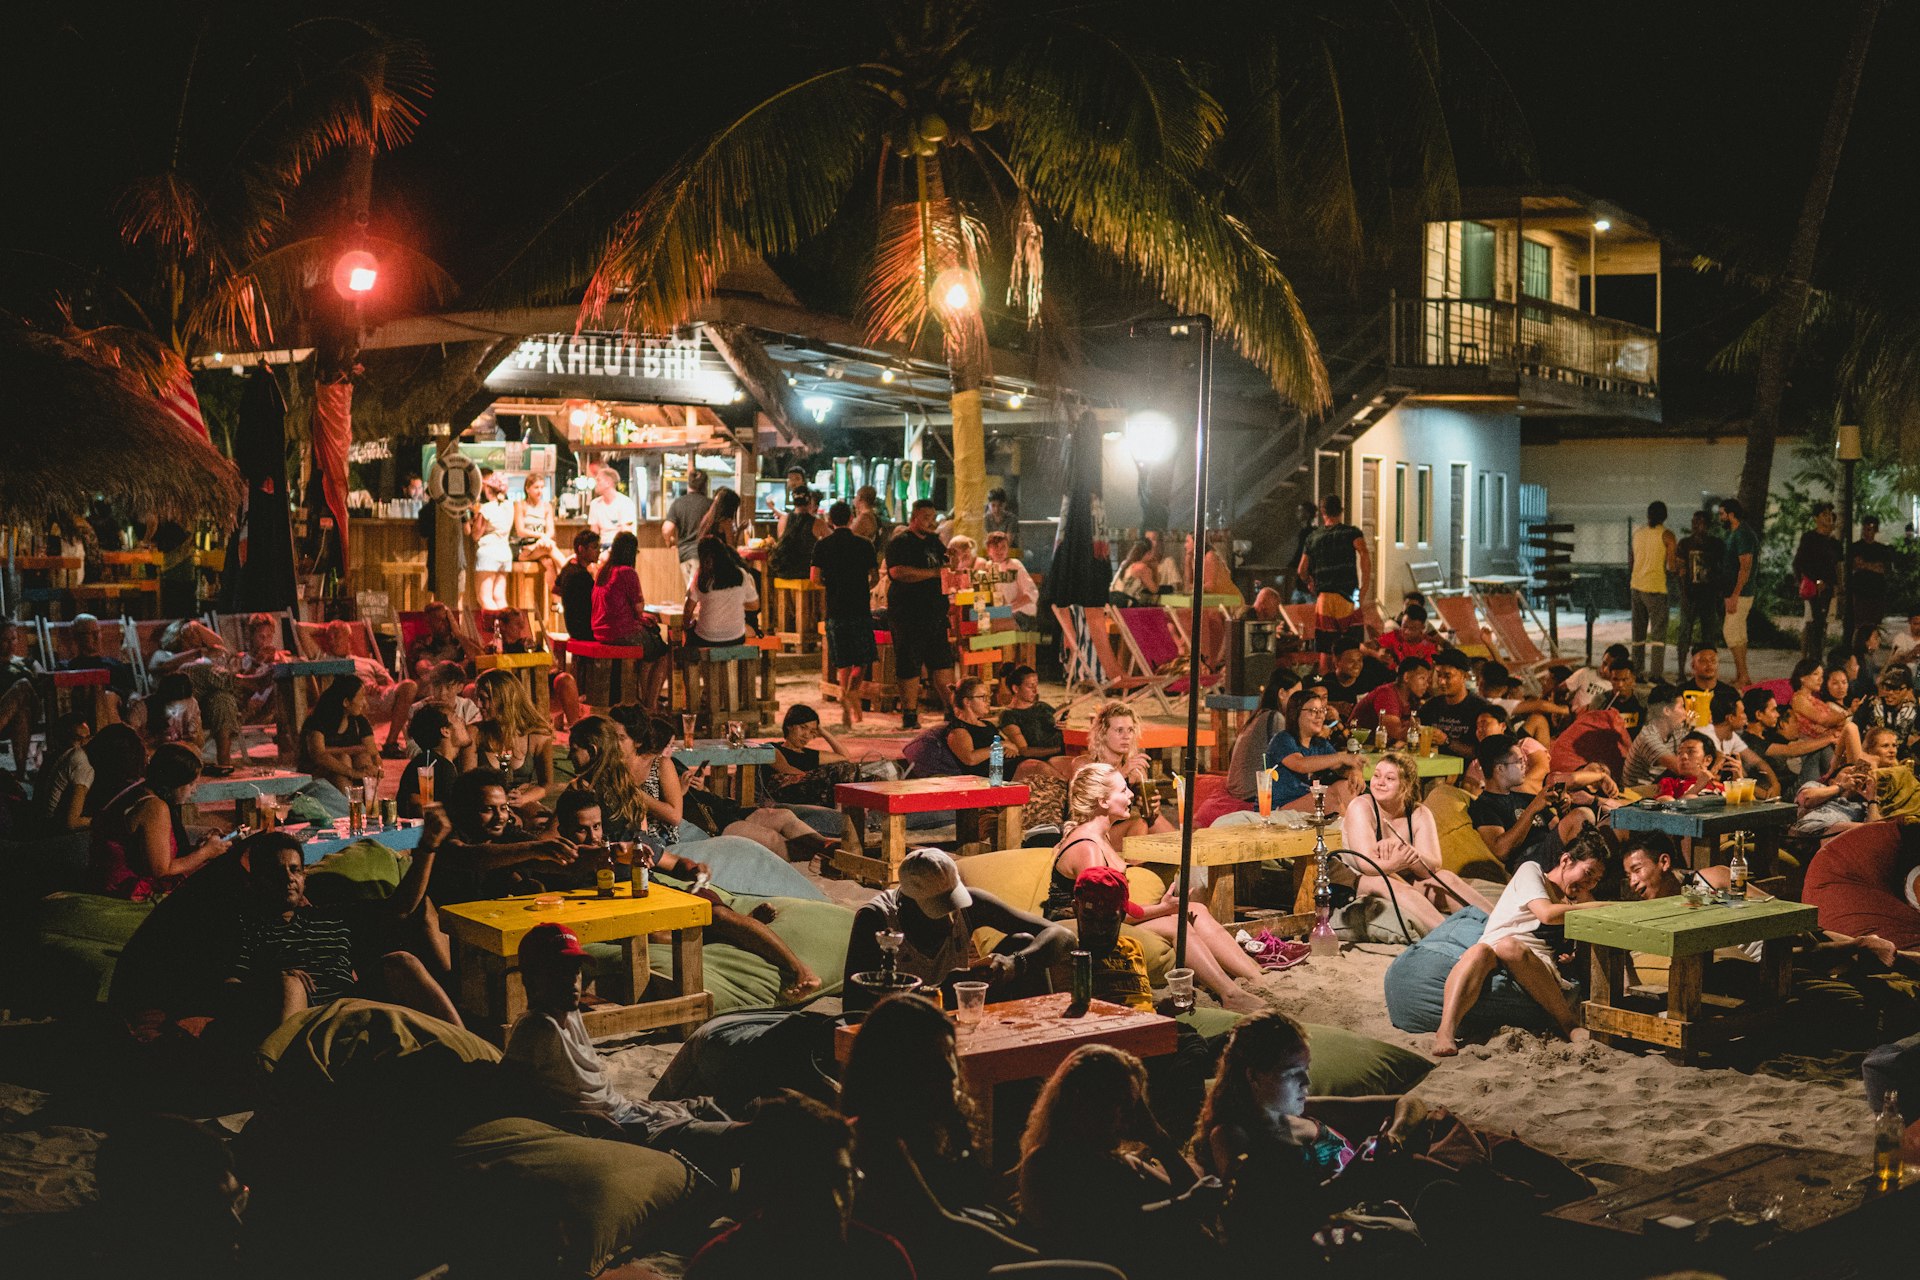 Large numbers of revelers sit on the sand and at tables drinking cocktails under overhead lights on Cenang Beach